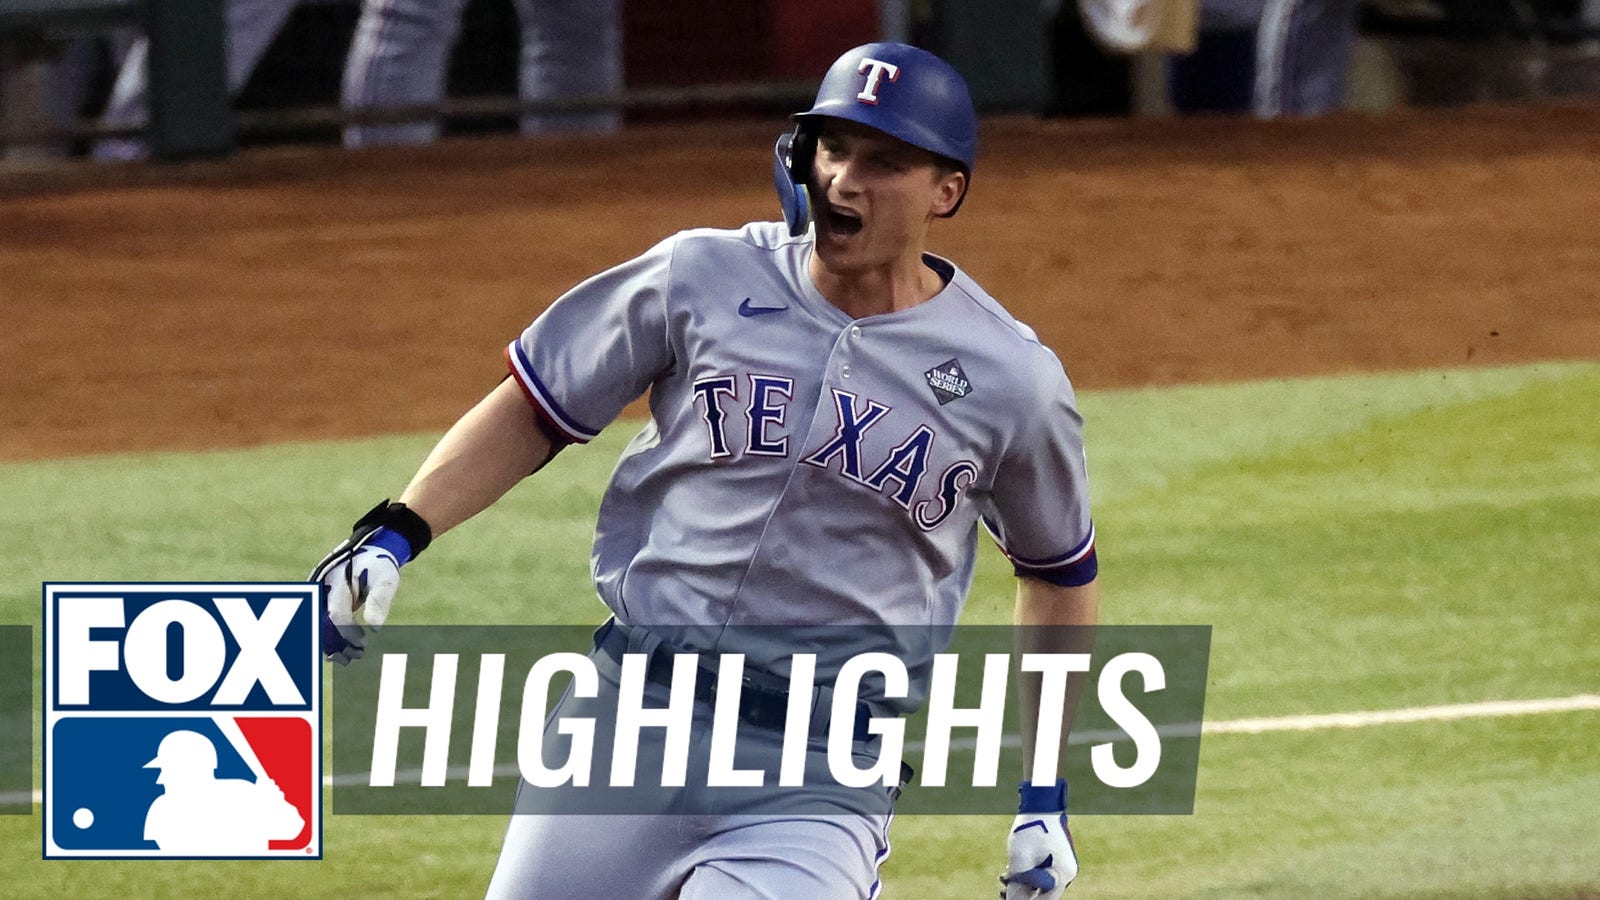 Rangers extend lead with XBH from Marcus Semien, Corey Seager